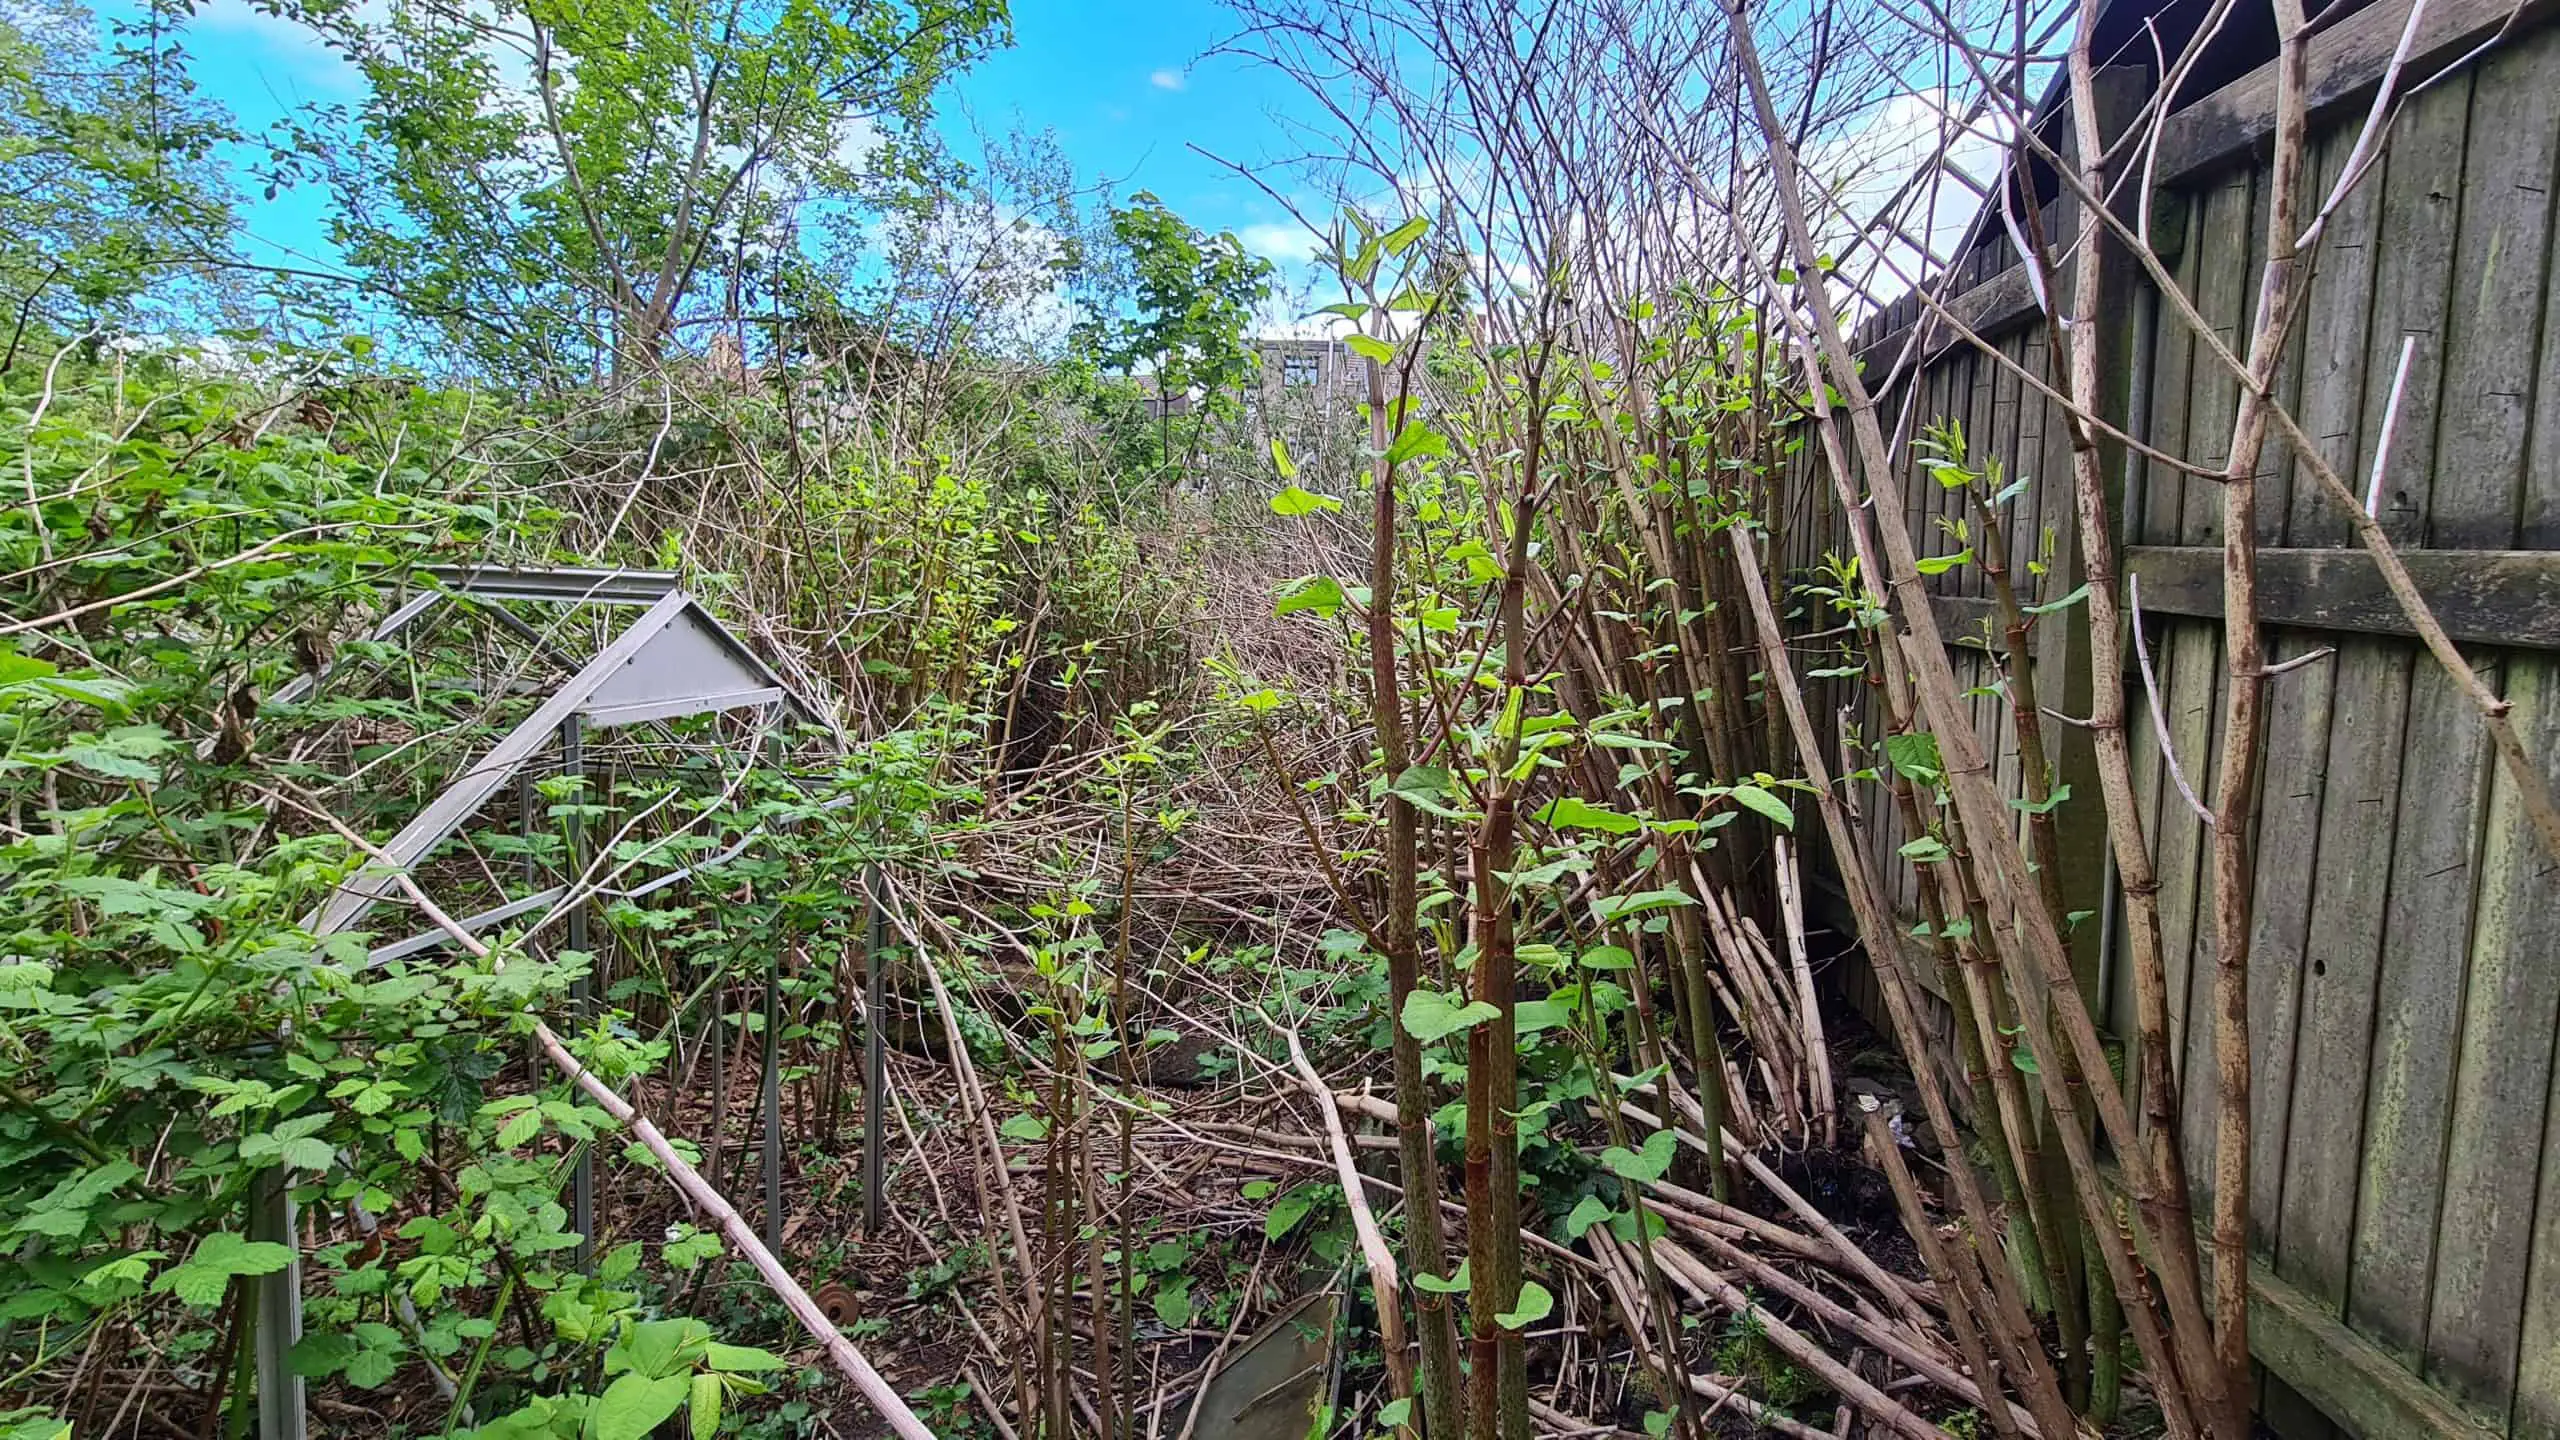 When confronted by a property such as this, clearly a surveyor would perform a Japanese knotweed survey to suggest a treatment plan